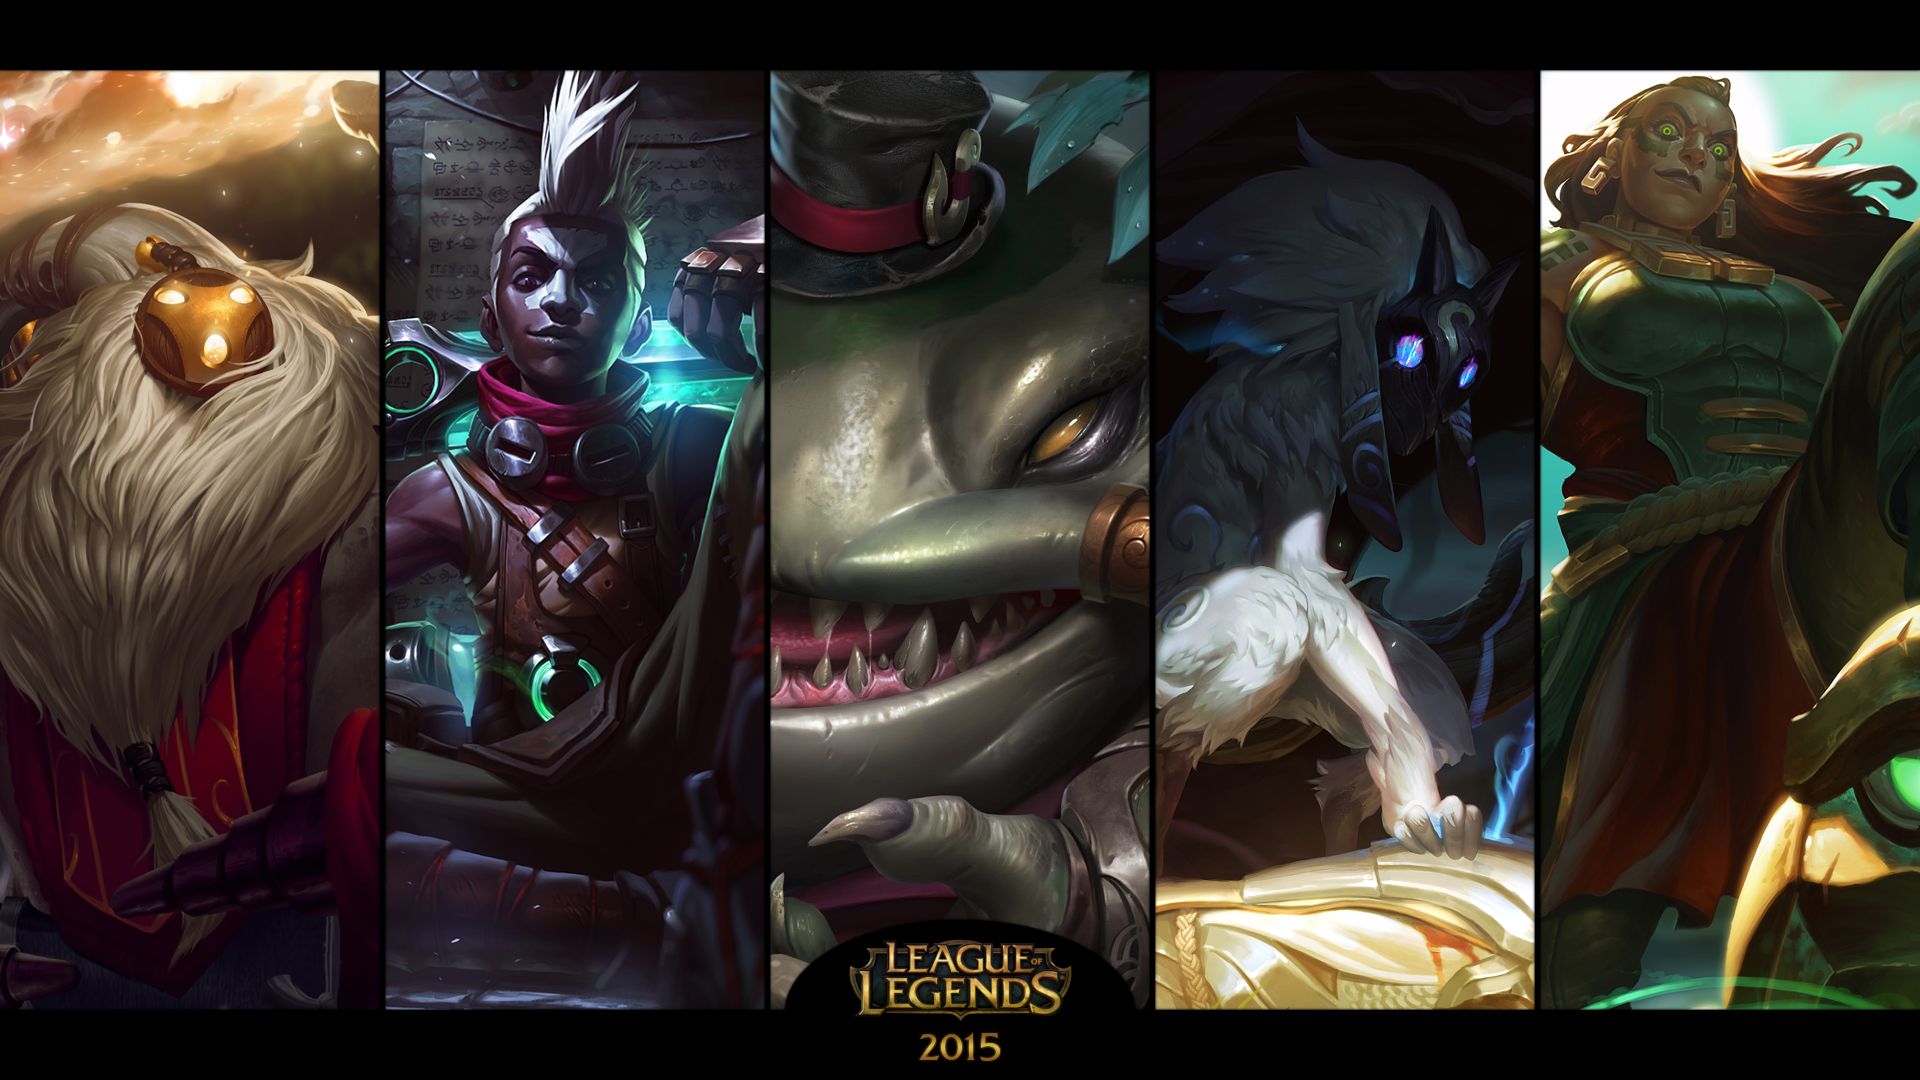 video game, league of legends, bard (league of legends), ekko (league of legends), illaoi (league of legends), kindred (league of legends), tahm kench (league of legends)